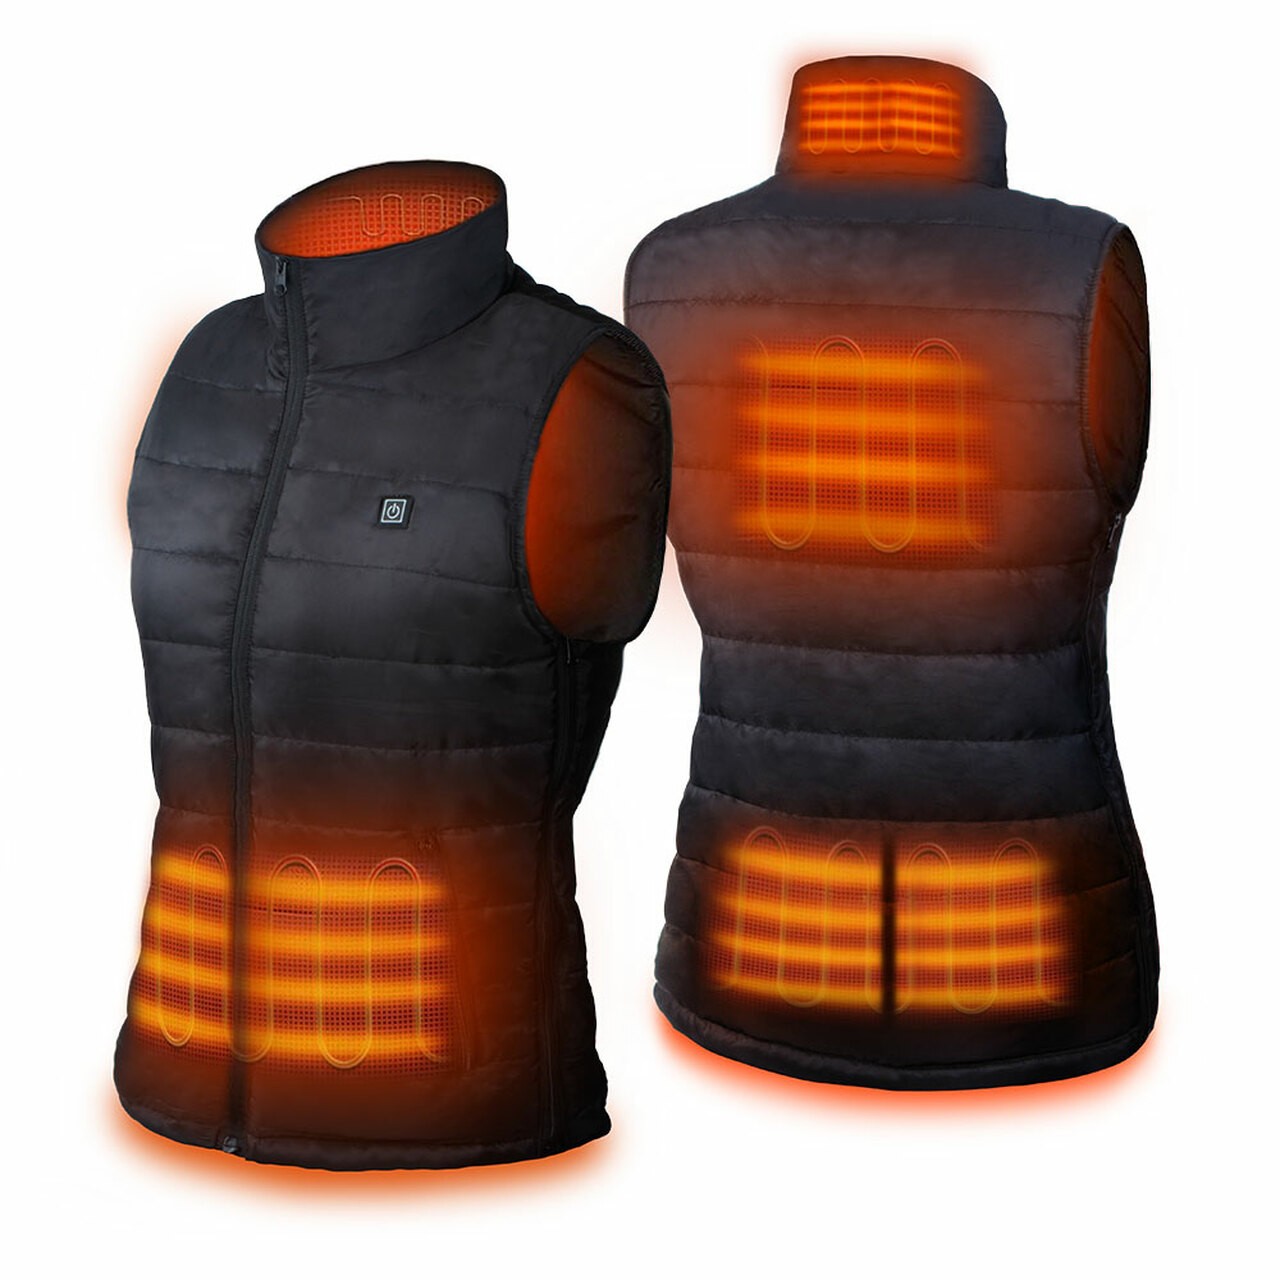 Heating Vest for Men Women Winter Warm Outdoor USB Charging Electric Heated Vest 8 Heated Zones,Battery Not Included